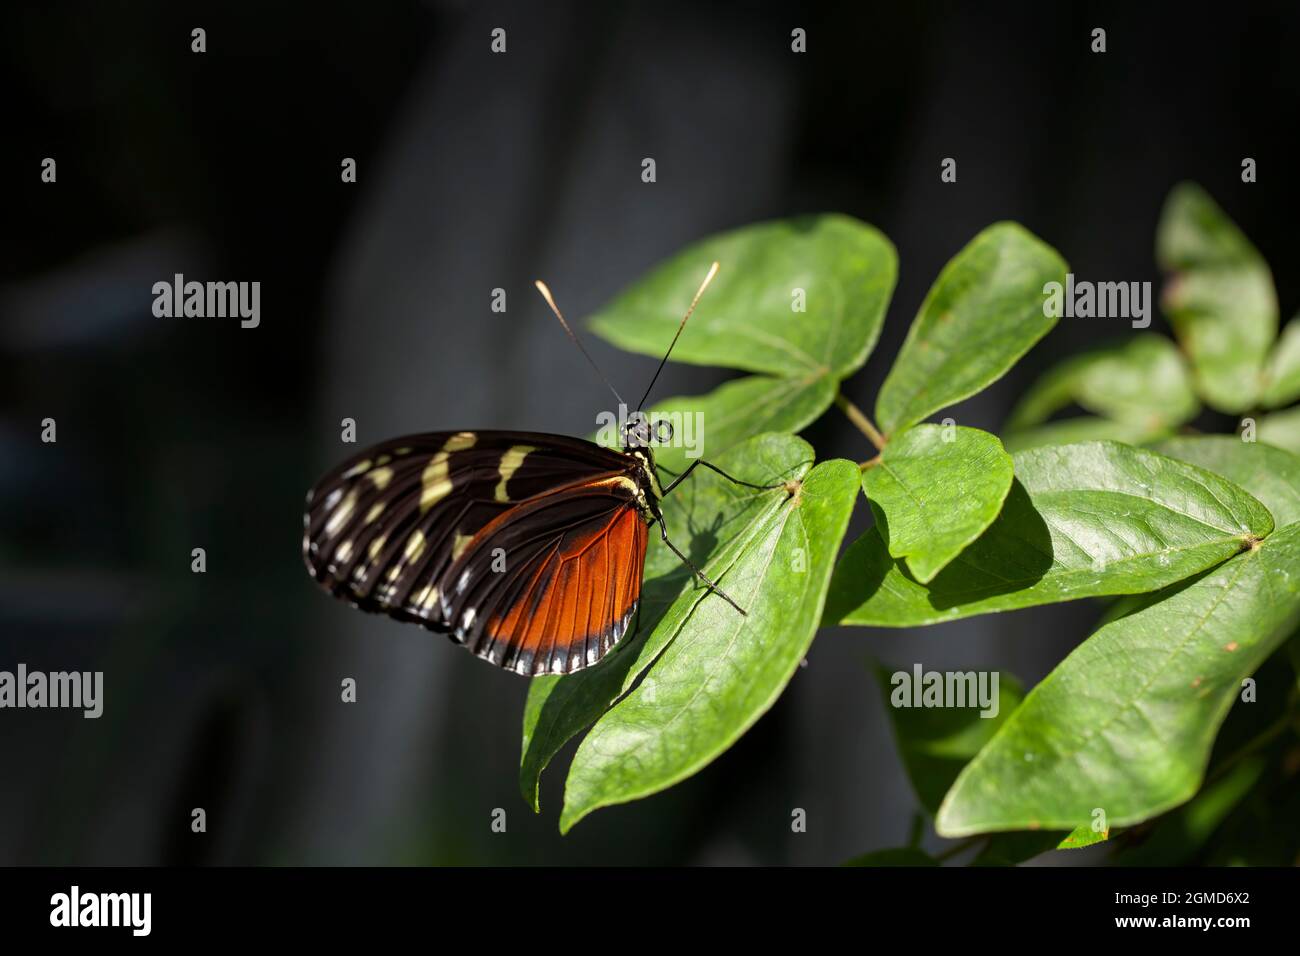 Beautif colorful tropical butterfly called Heliconius hecale  |  Tiger longwing  |  Golden longwing standing on green leaves in Konya tropical butterf Stock Photo